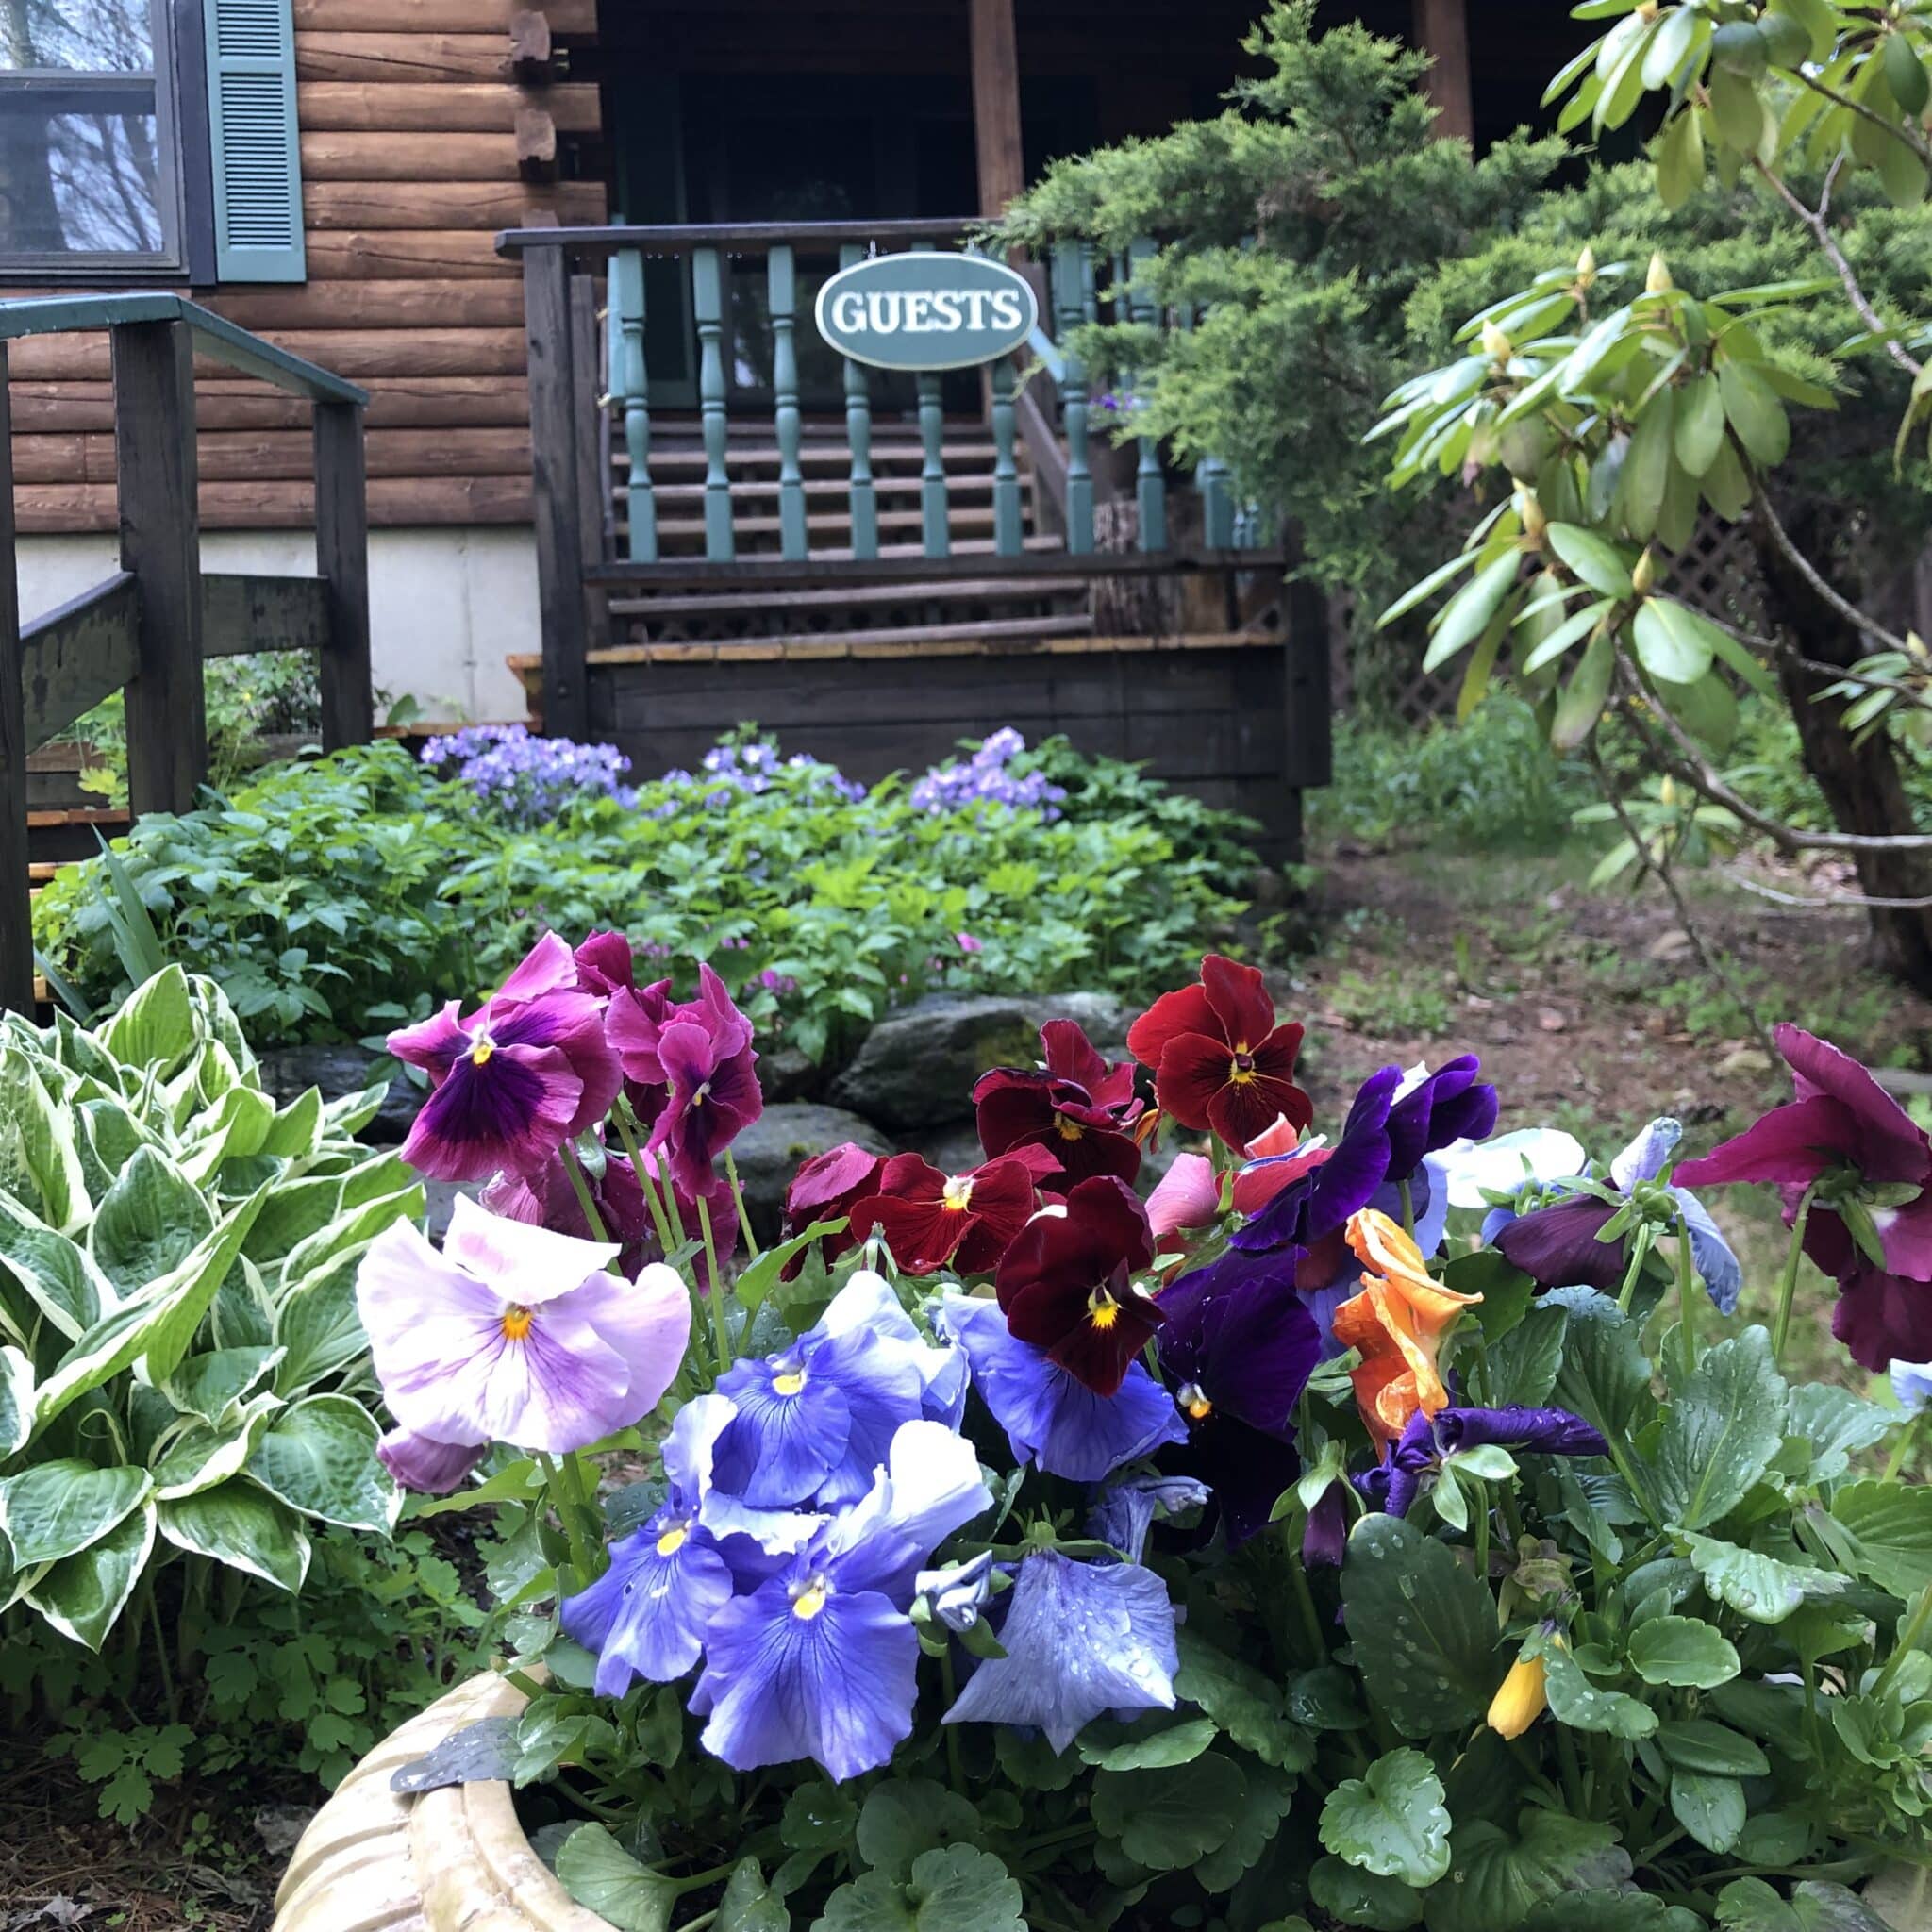 The lodge front entry with a flower pot of pansies.